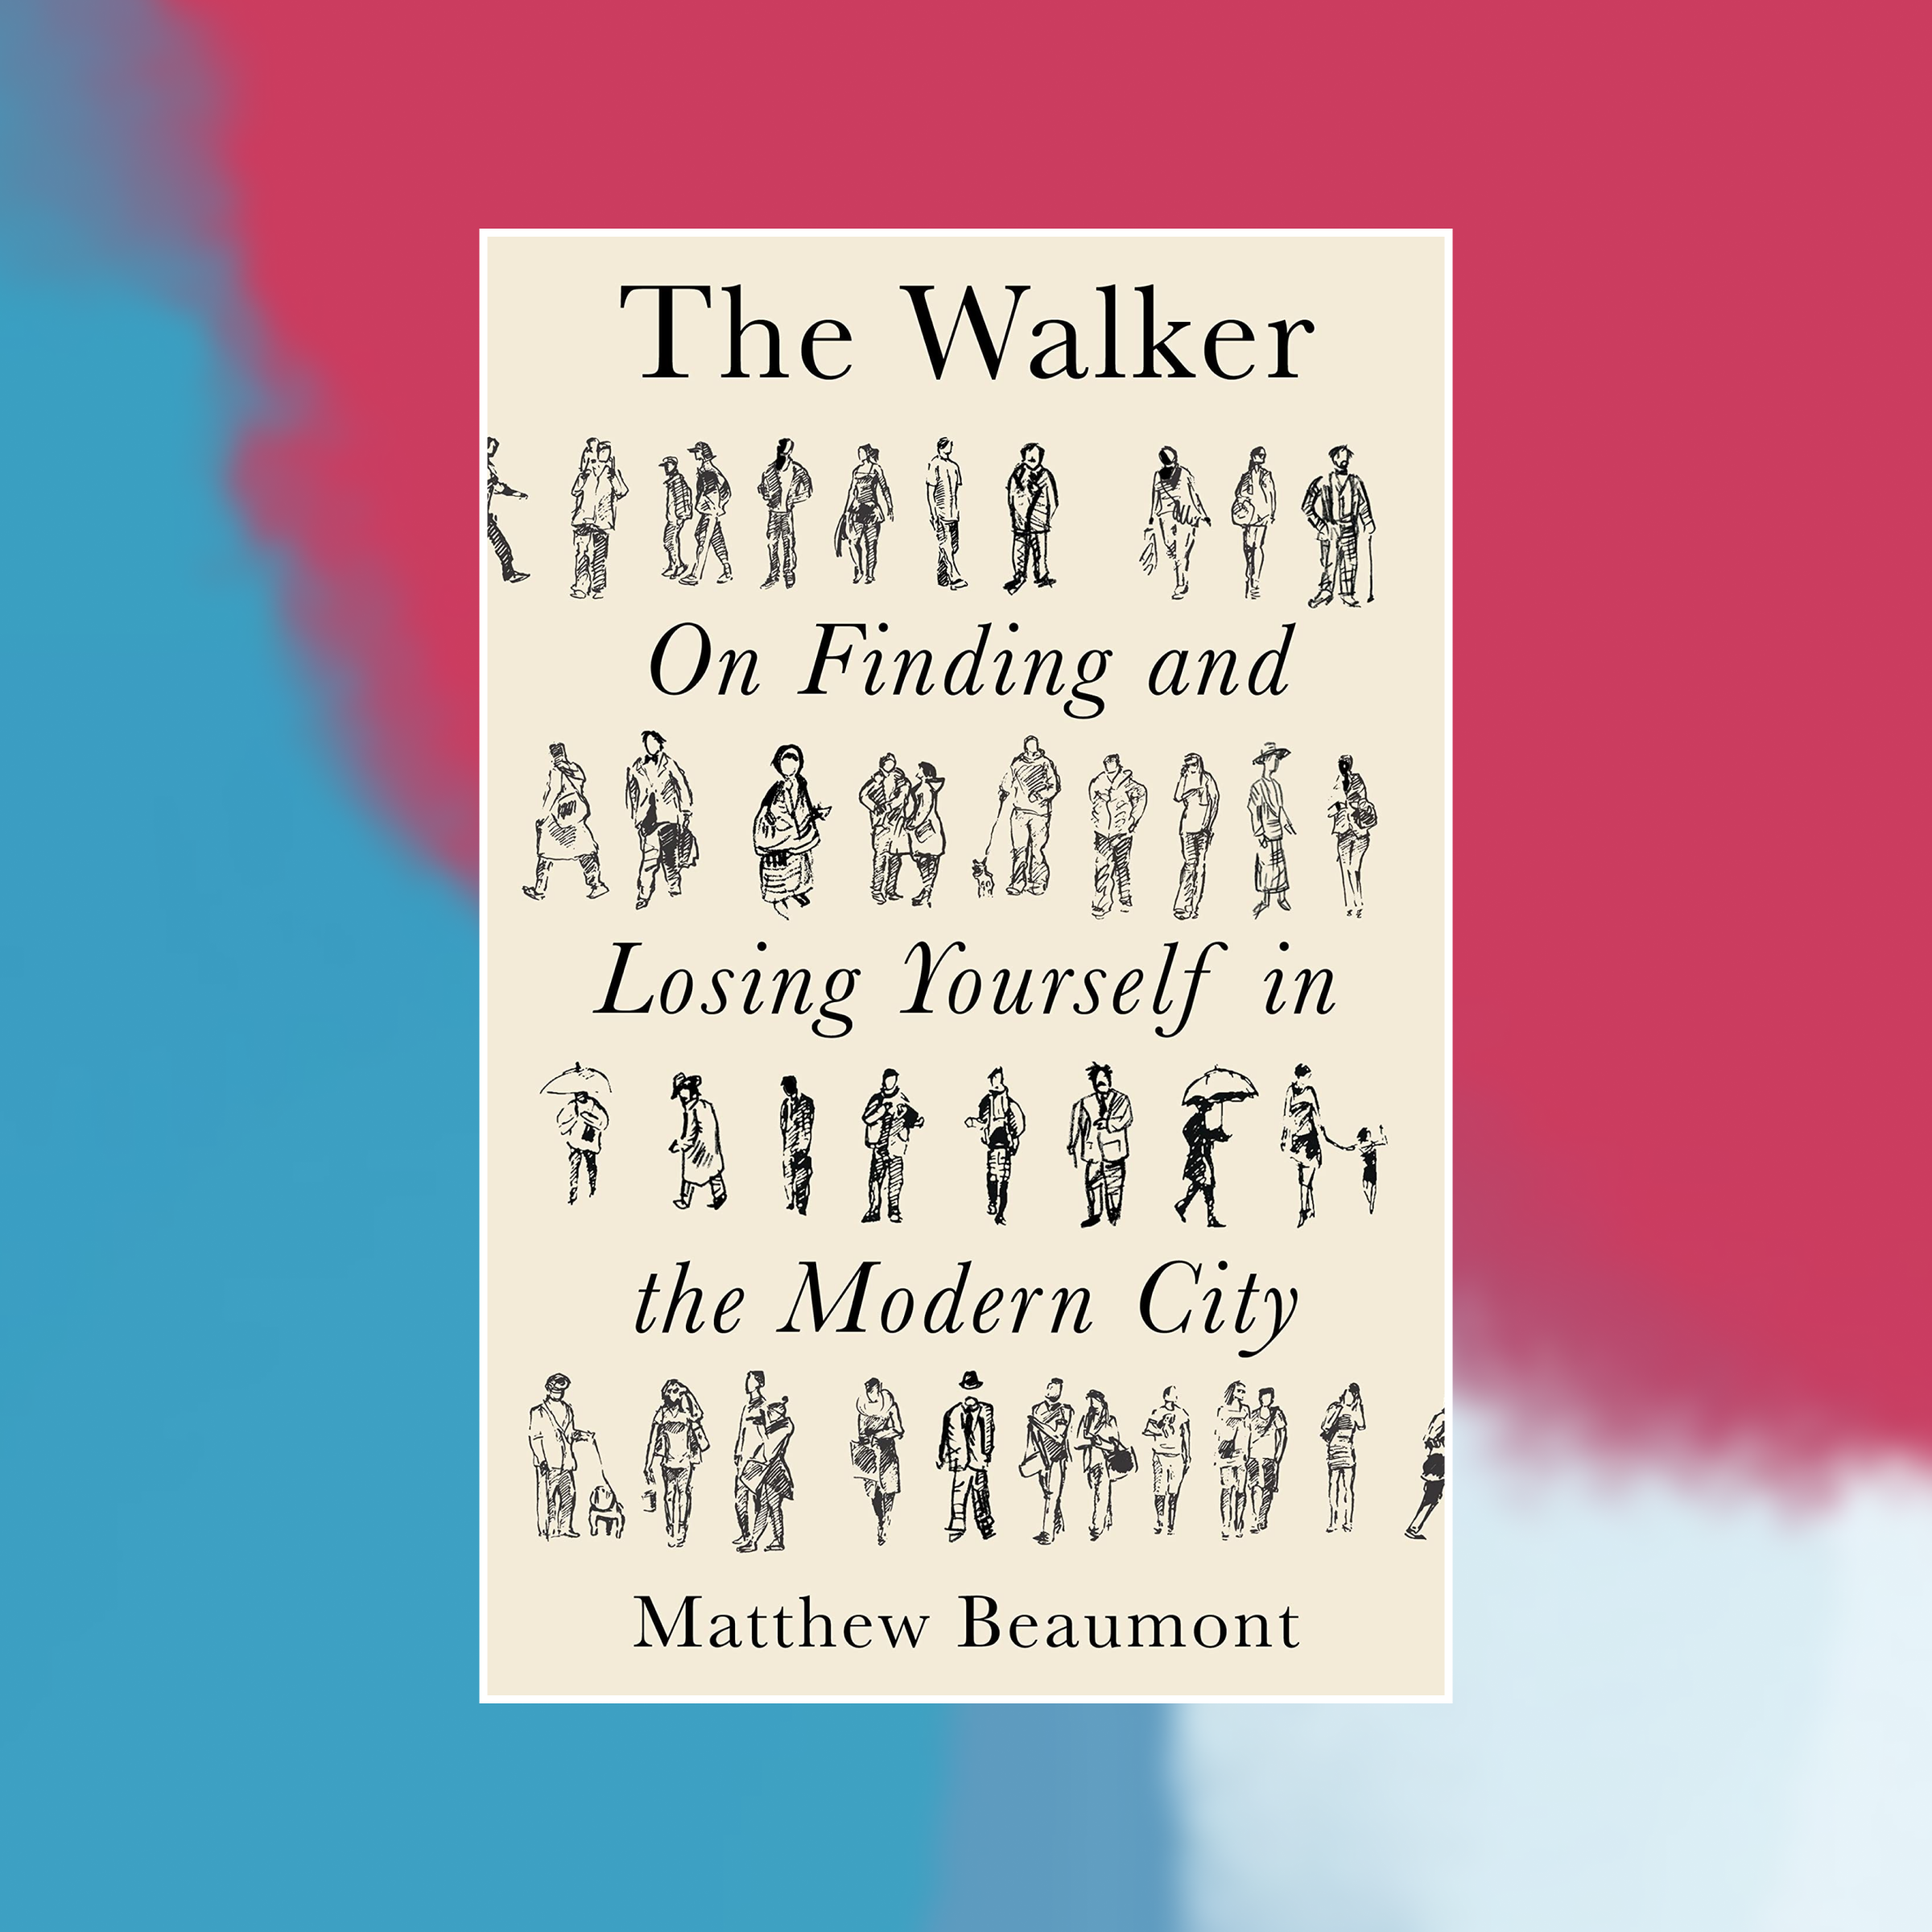 Book cover of The Walker against an abstract painted background